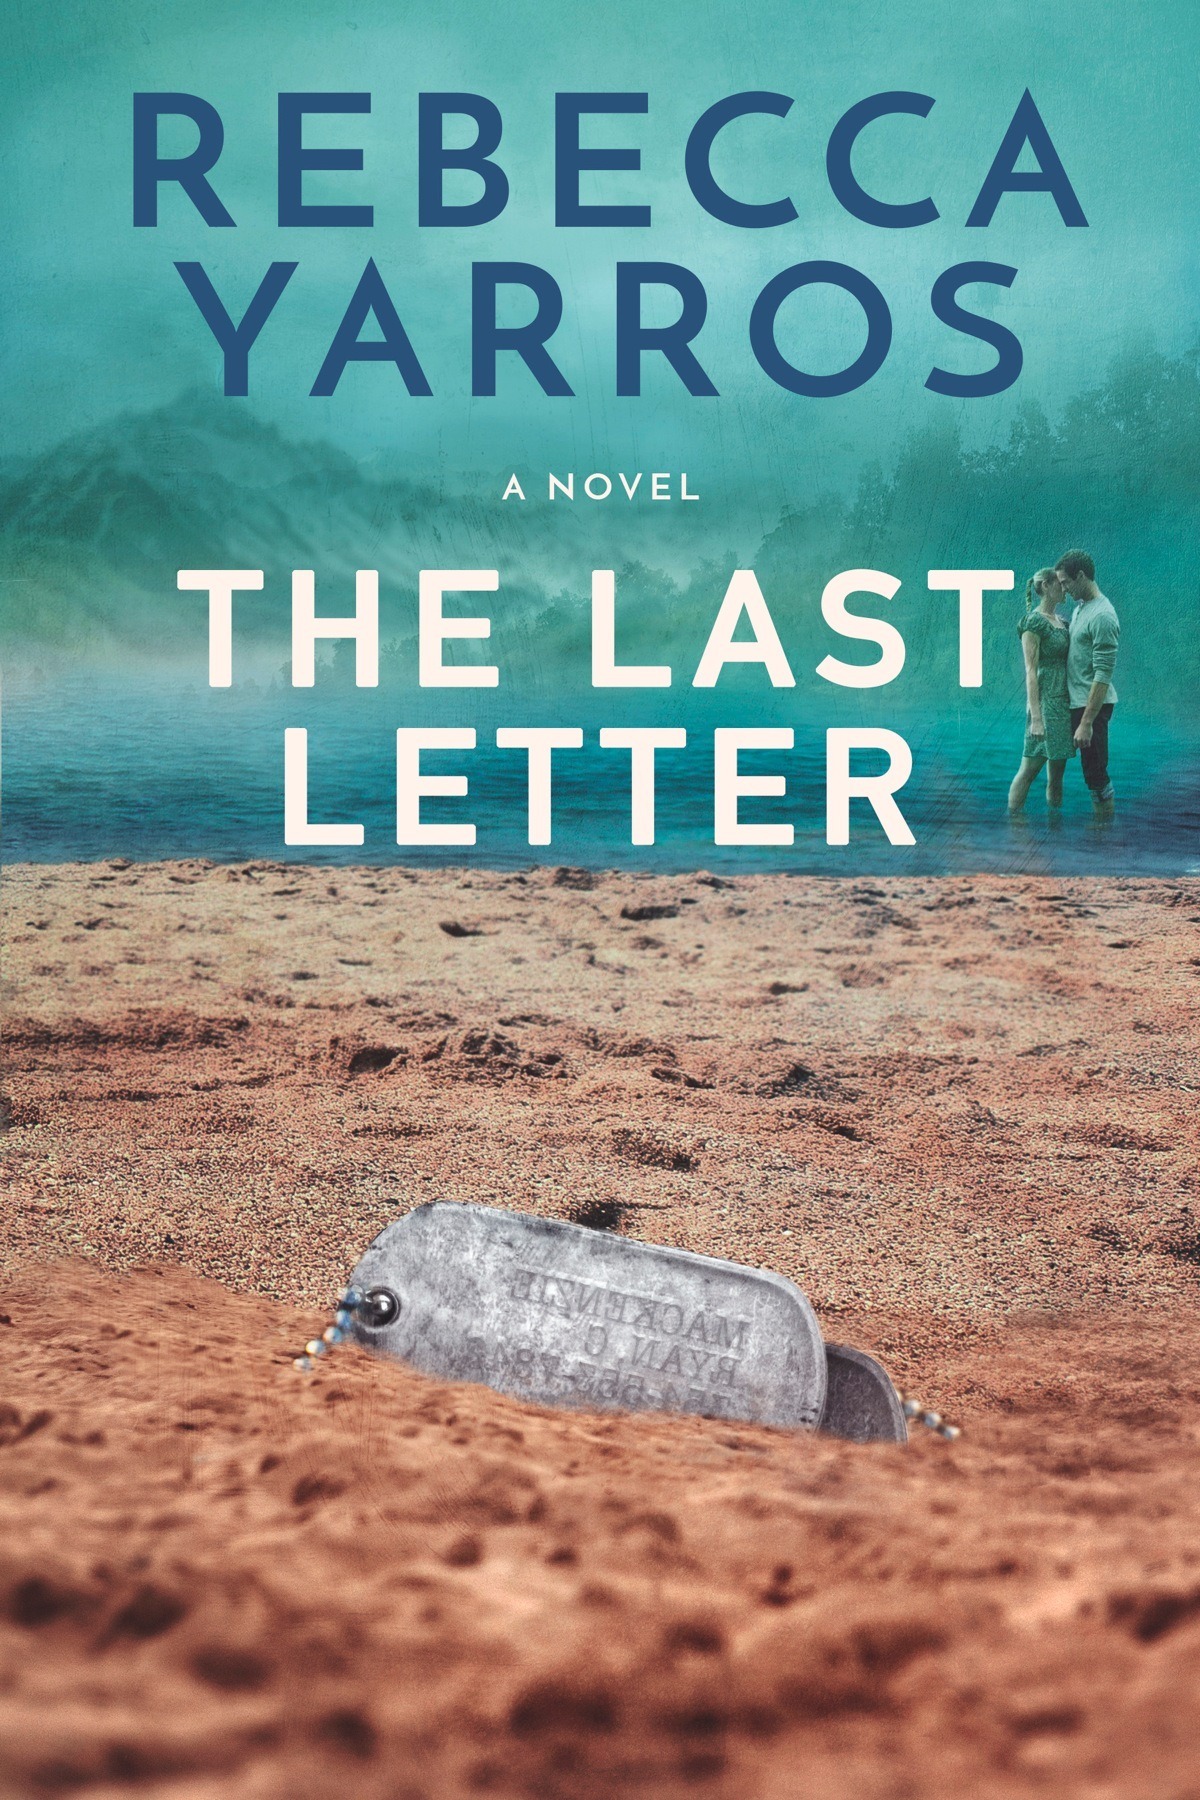 [EPUB] The Last Letter by Rebecca Yarros